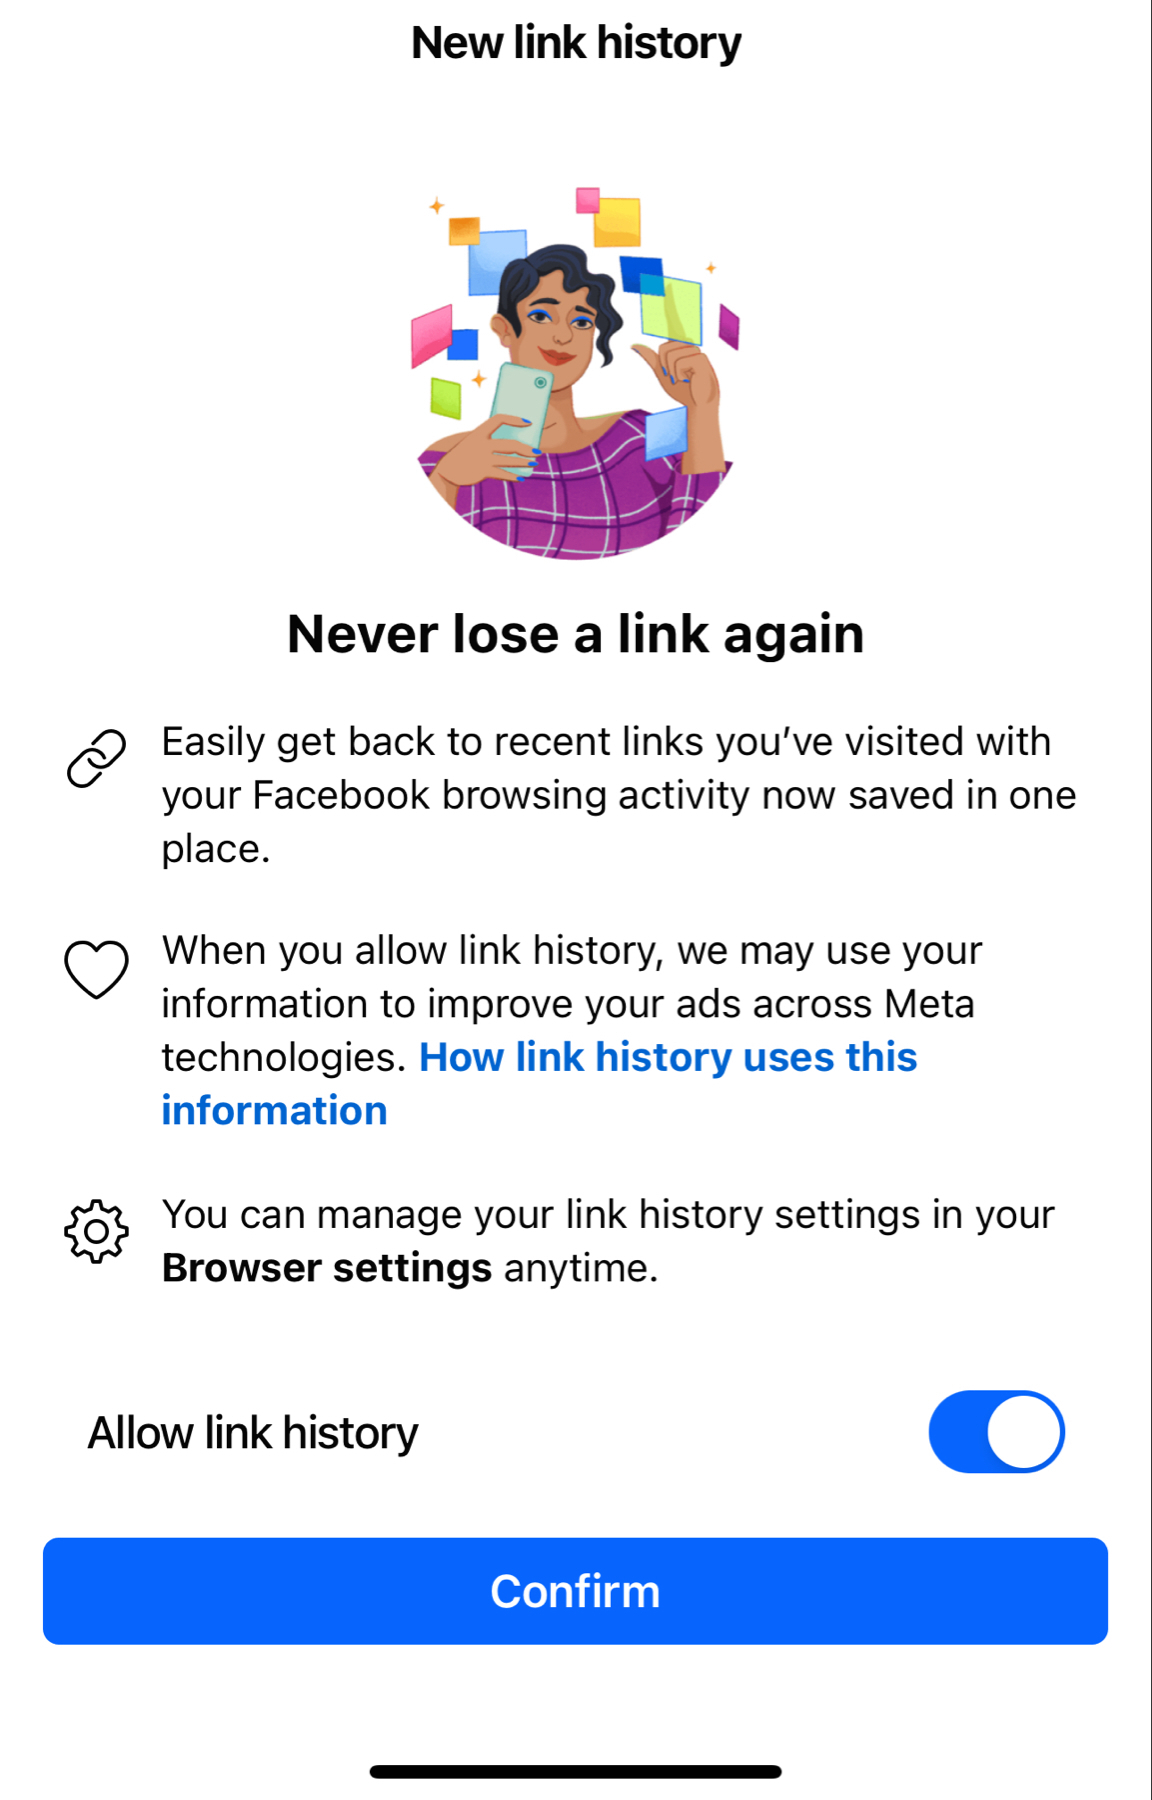 A mobile application screen prompting the user to enable ‘New link history’ with an illustration of a person holding a smartphone, surrounded by colorful post-it notes, and text detailing the feature’s benefits, including easy access to recent links, potential use of browsing